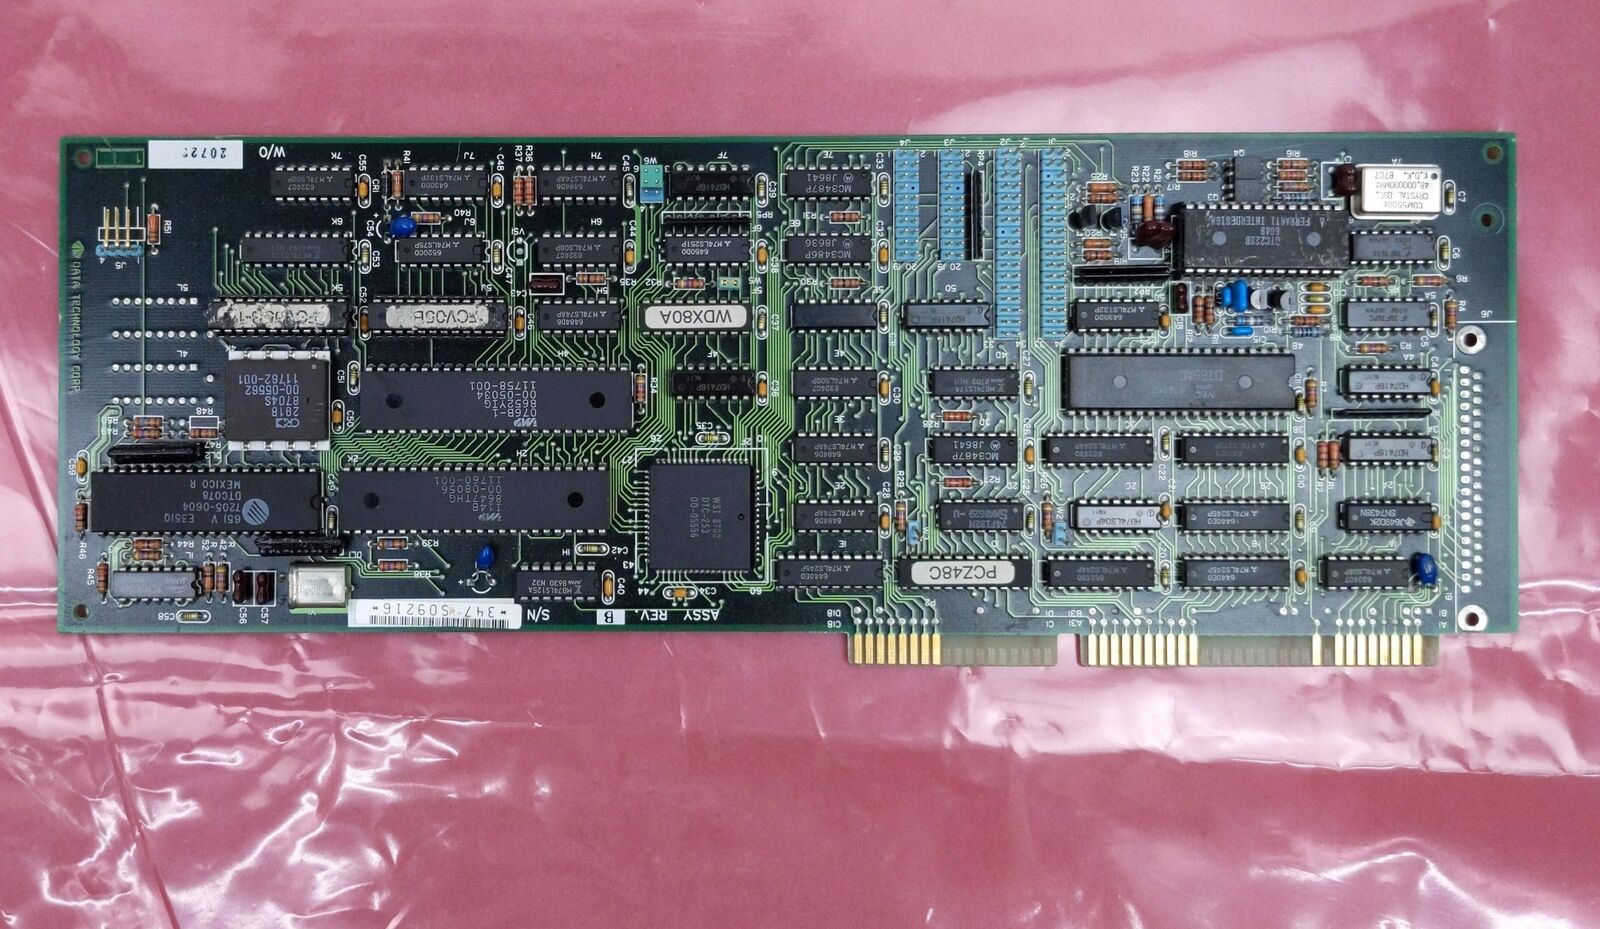 DTC MFM Hard Drive + Floppy Controller ~ IBM AT 16-BIT ISA ~ AS-IS FOR PARTS